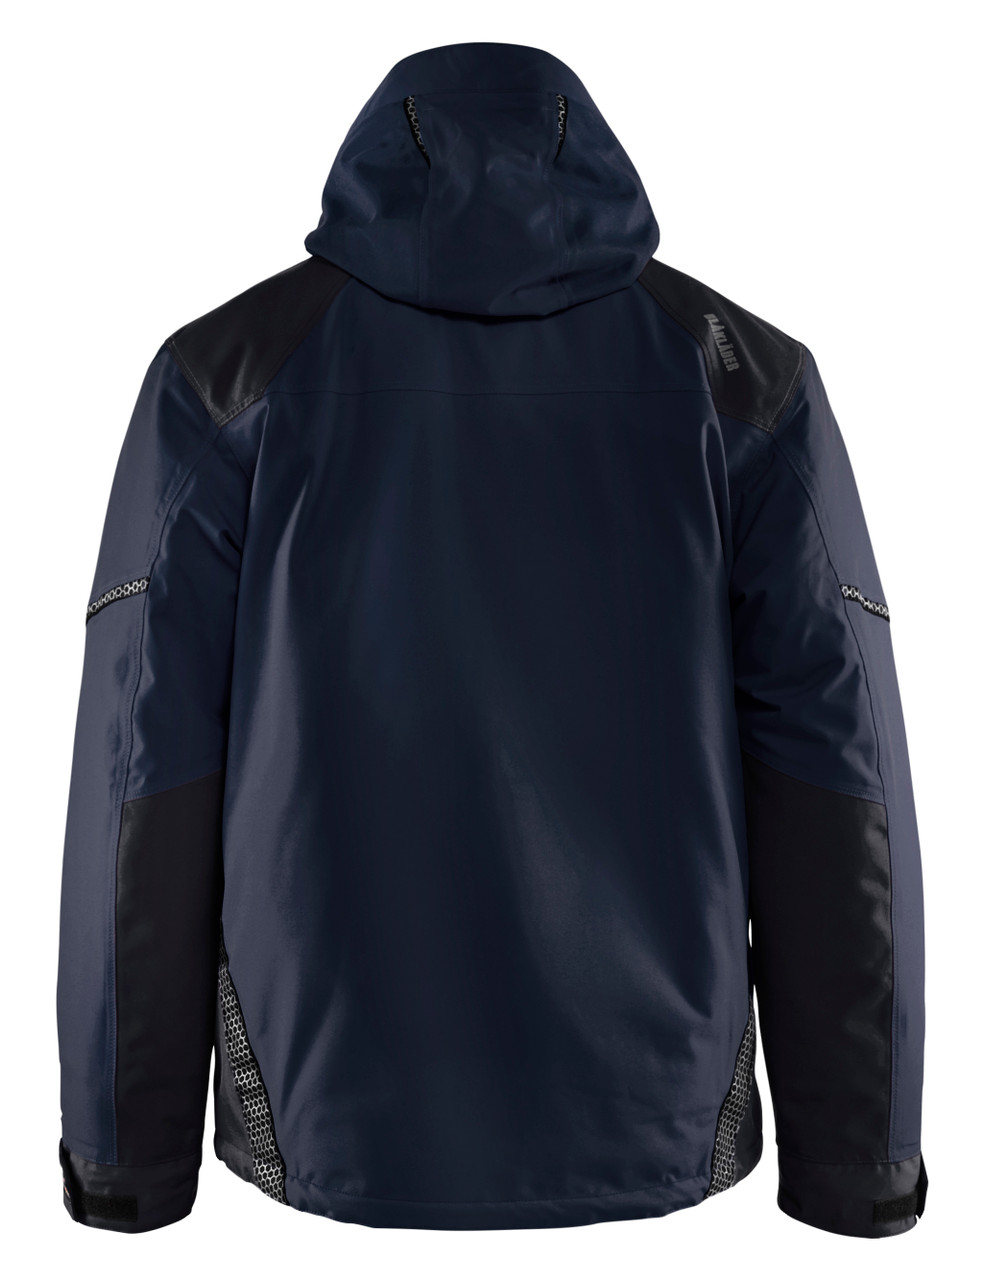 Buy online in Australia and New Zealand a Mens Dark Navy Blue Jacket  for Electricians that are comfortable and durable.